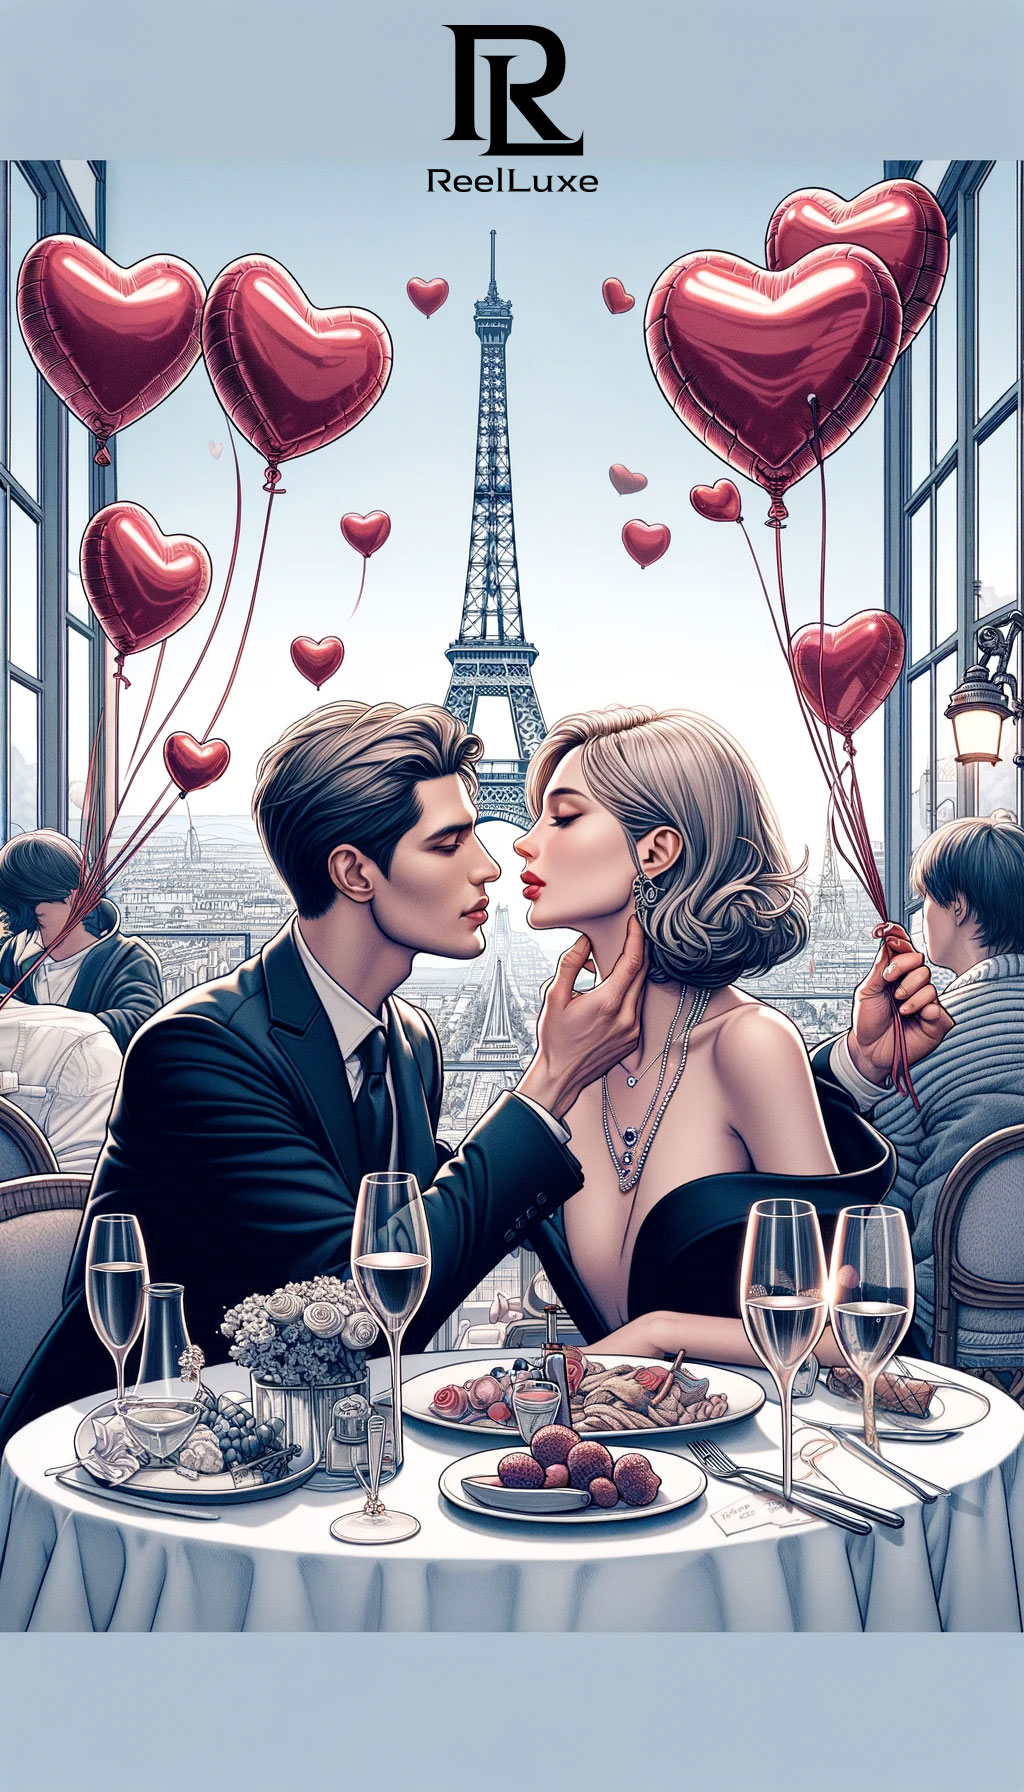 Romance in the Air - Valentine's Day - Beauty and Fashion - Paris, France - 6